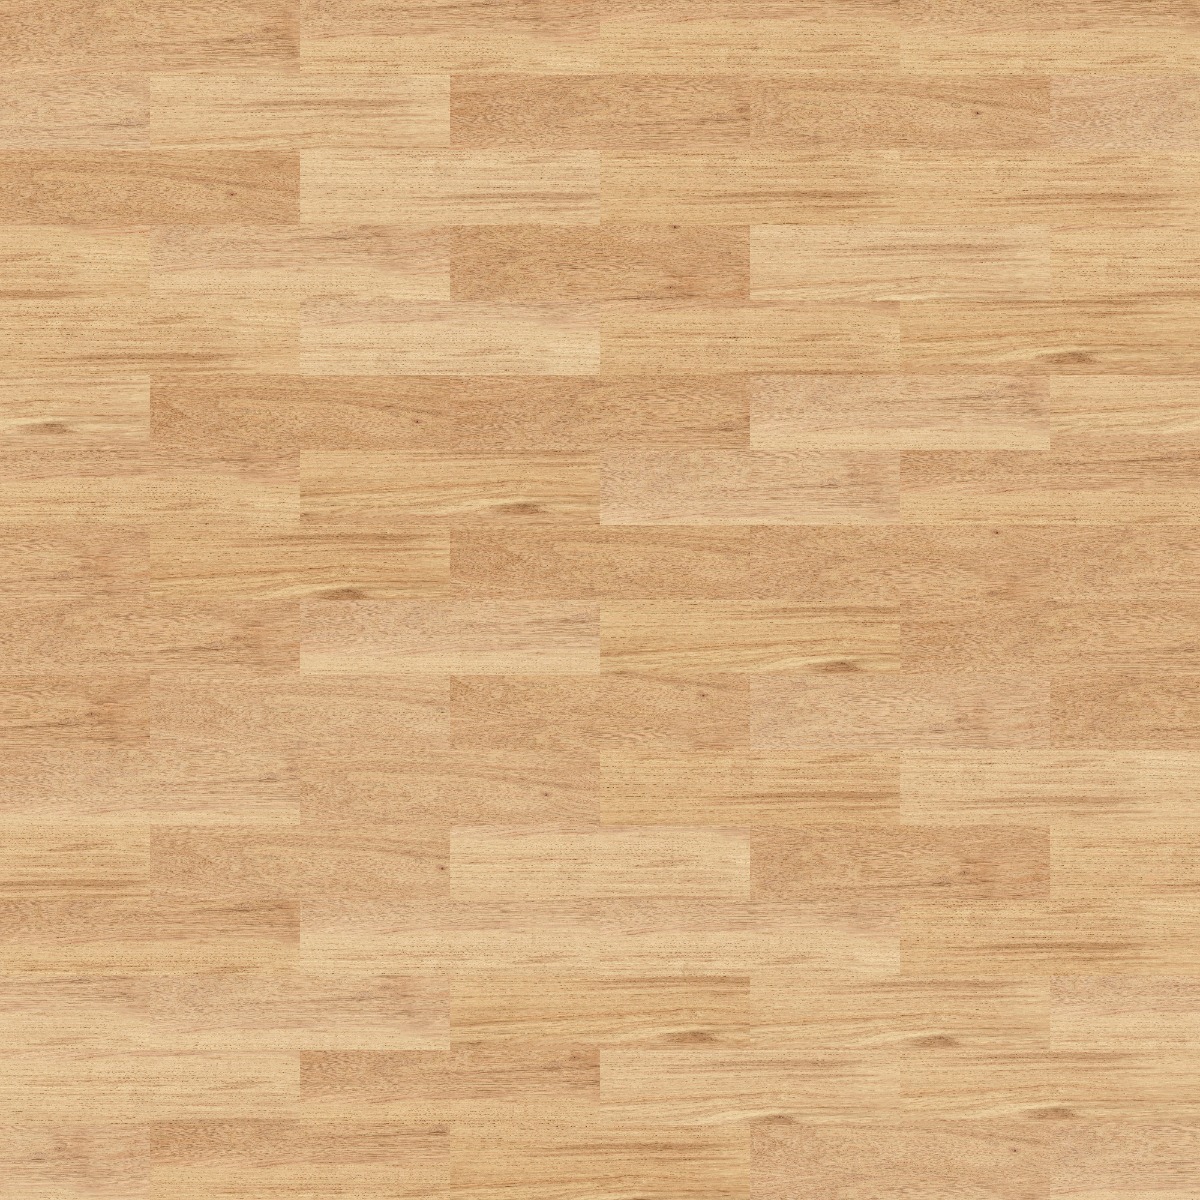 A seamless wood texture with oak veneered mdf boards arranged in a Stretcher pattern